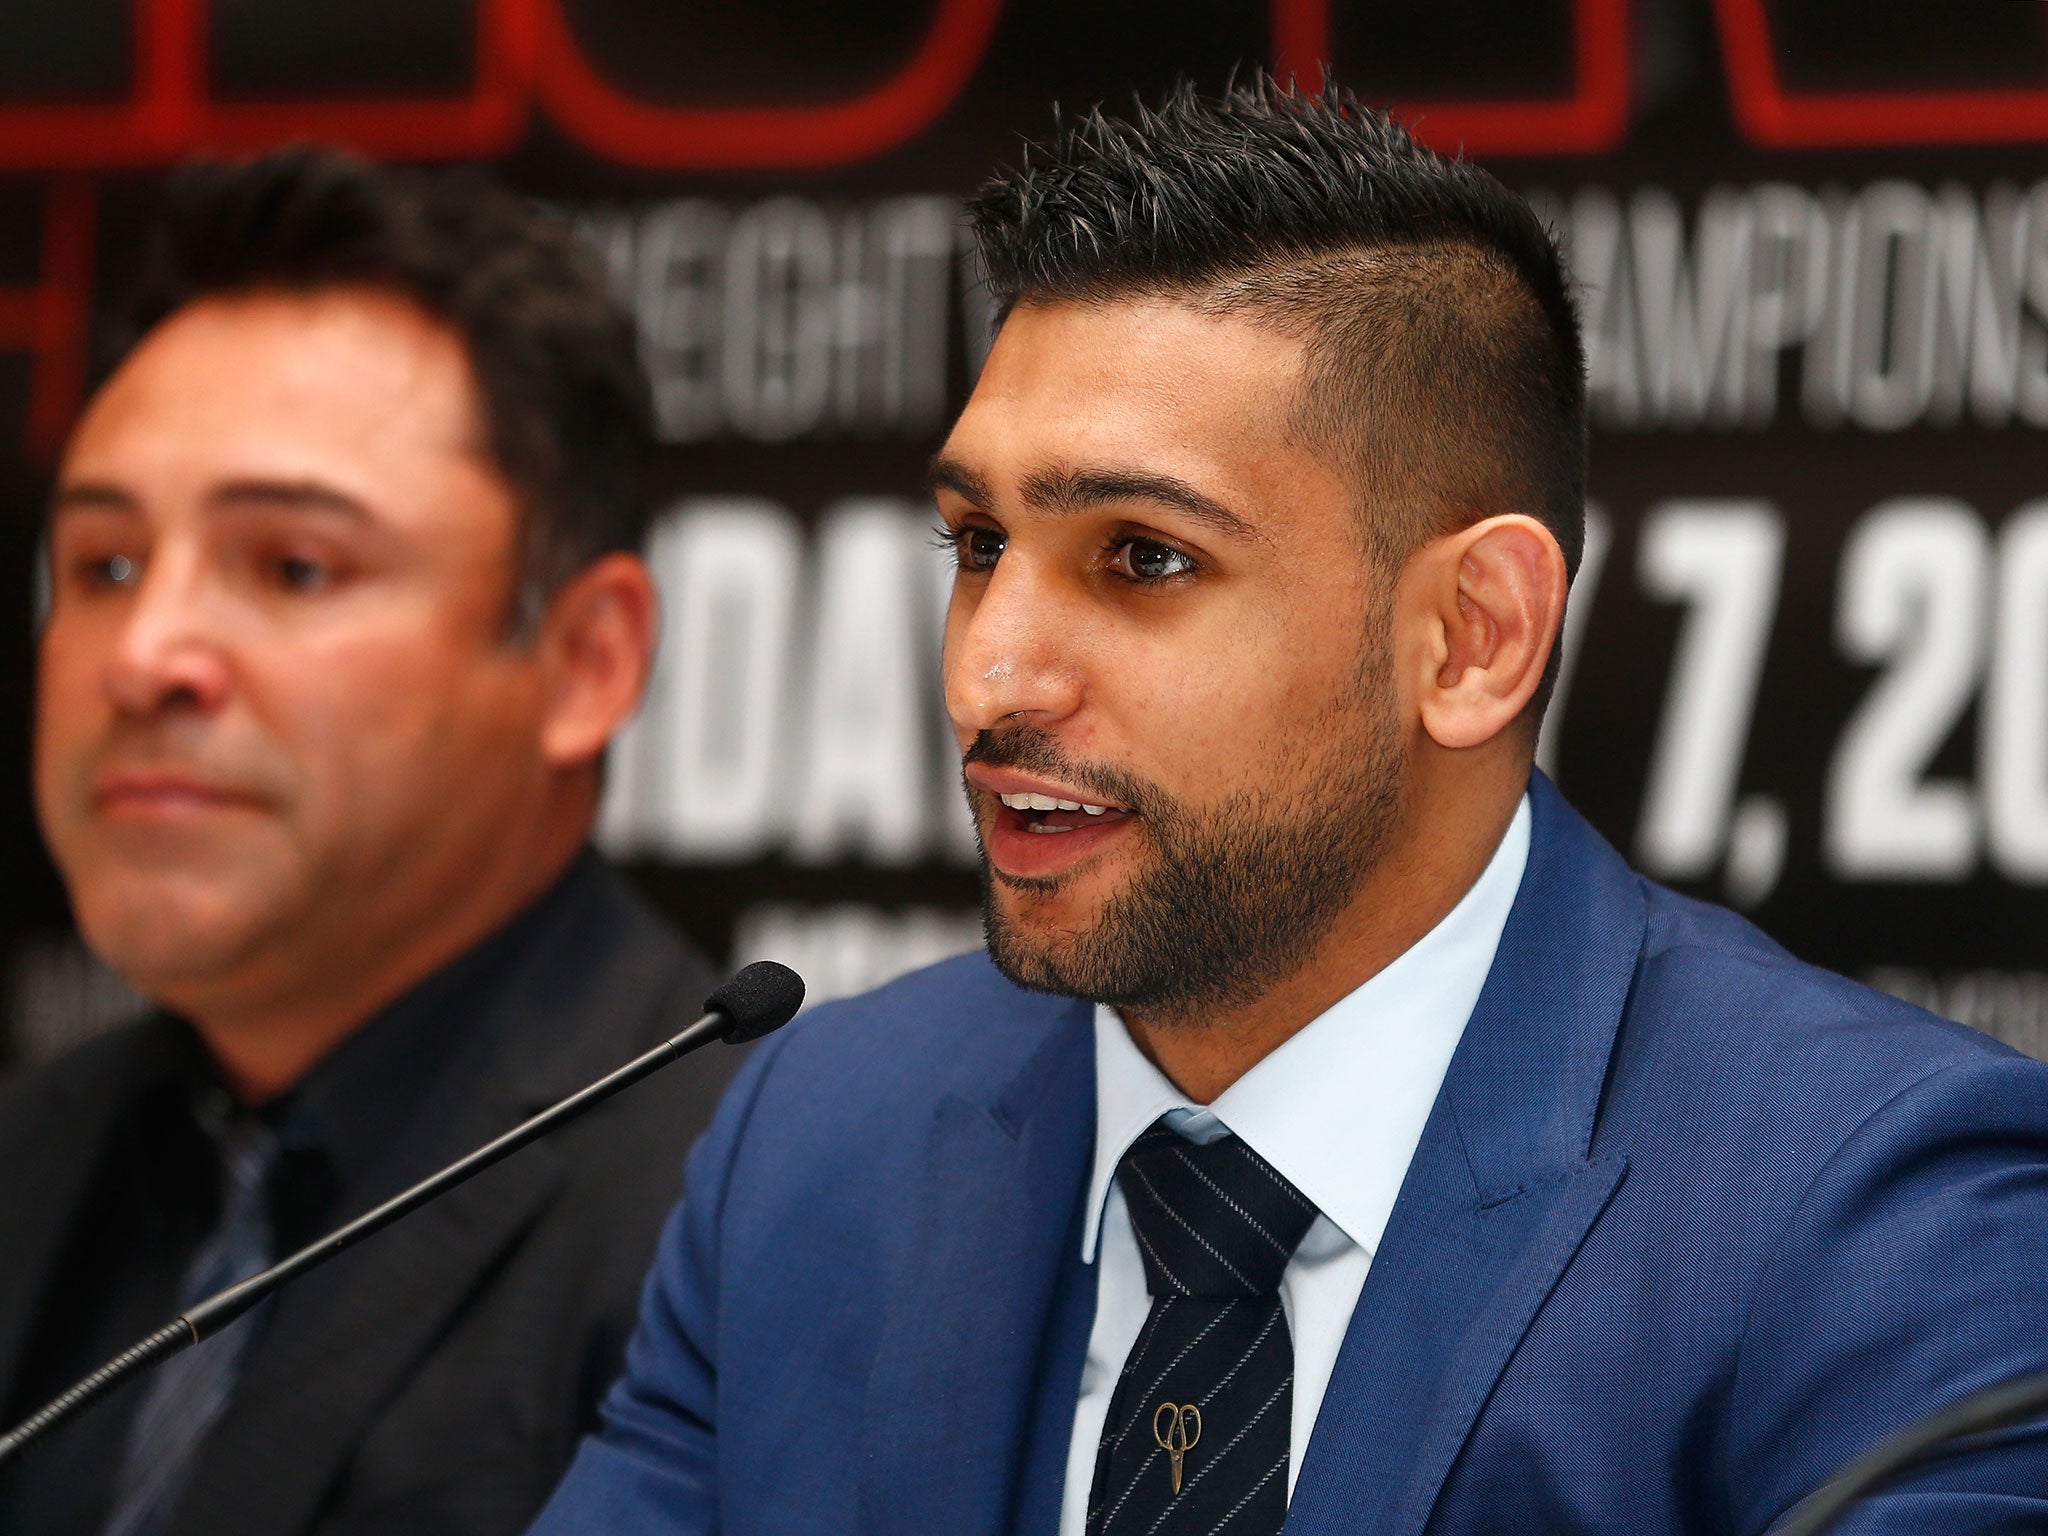 Amir Khan has said he will stick by his wife after a family feud broke out